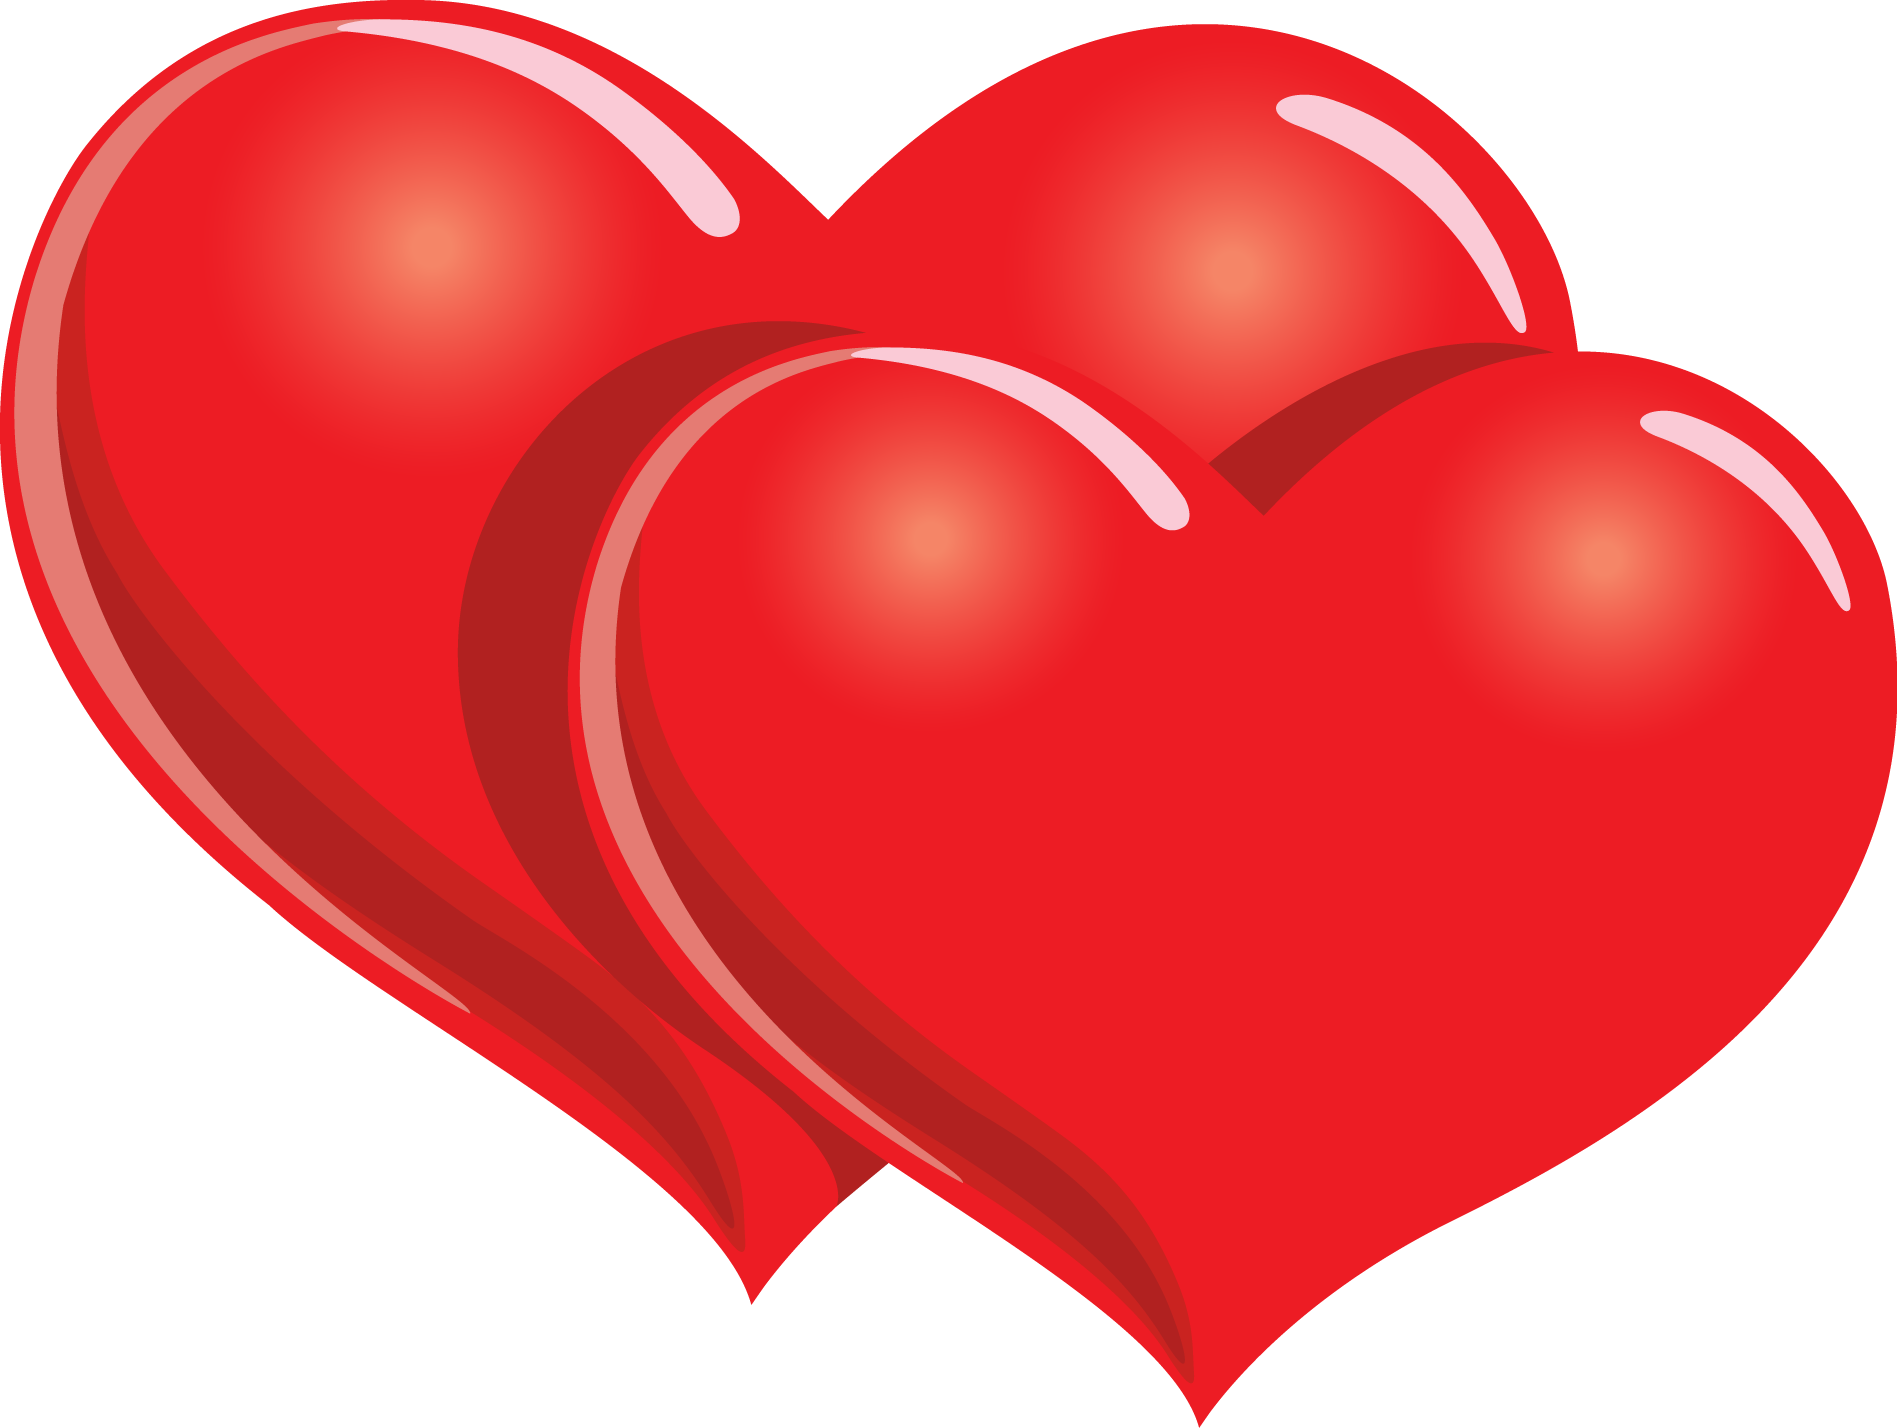 A Picture Of A Red Heart | Free Download Clip Art | Free Clip Art ...